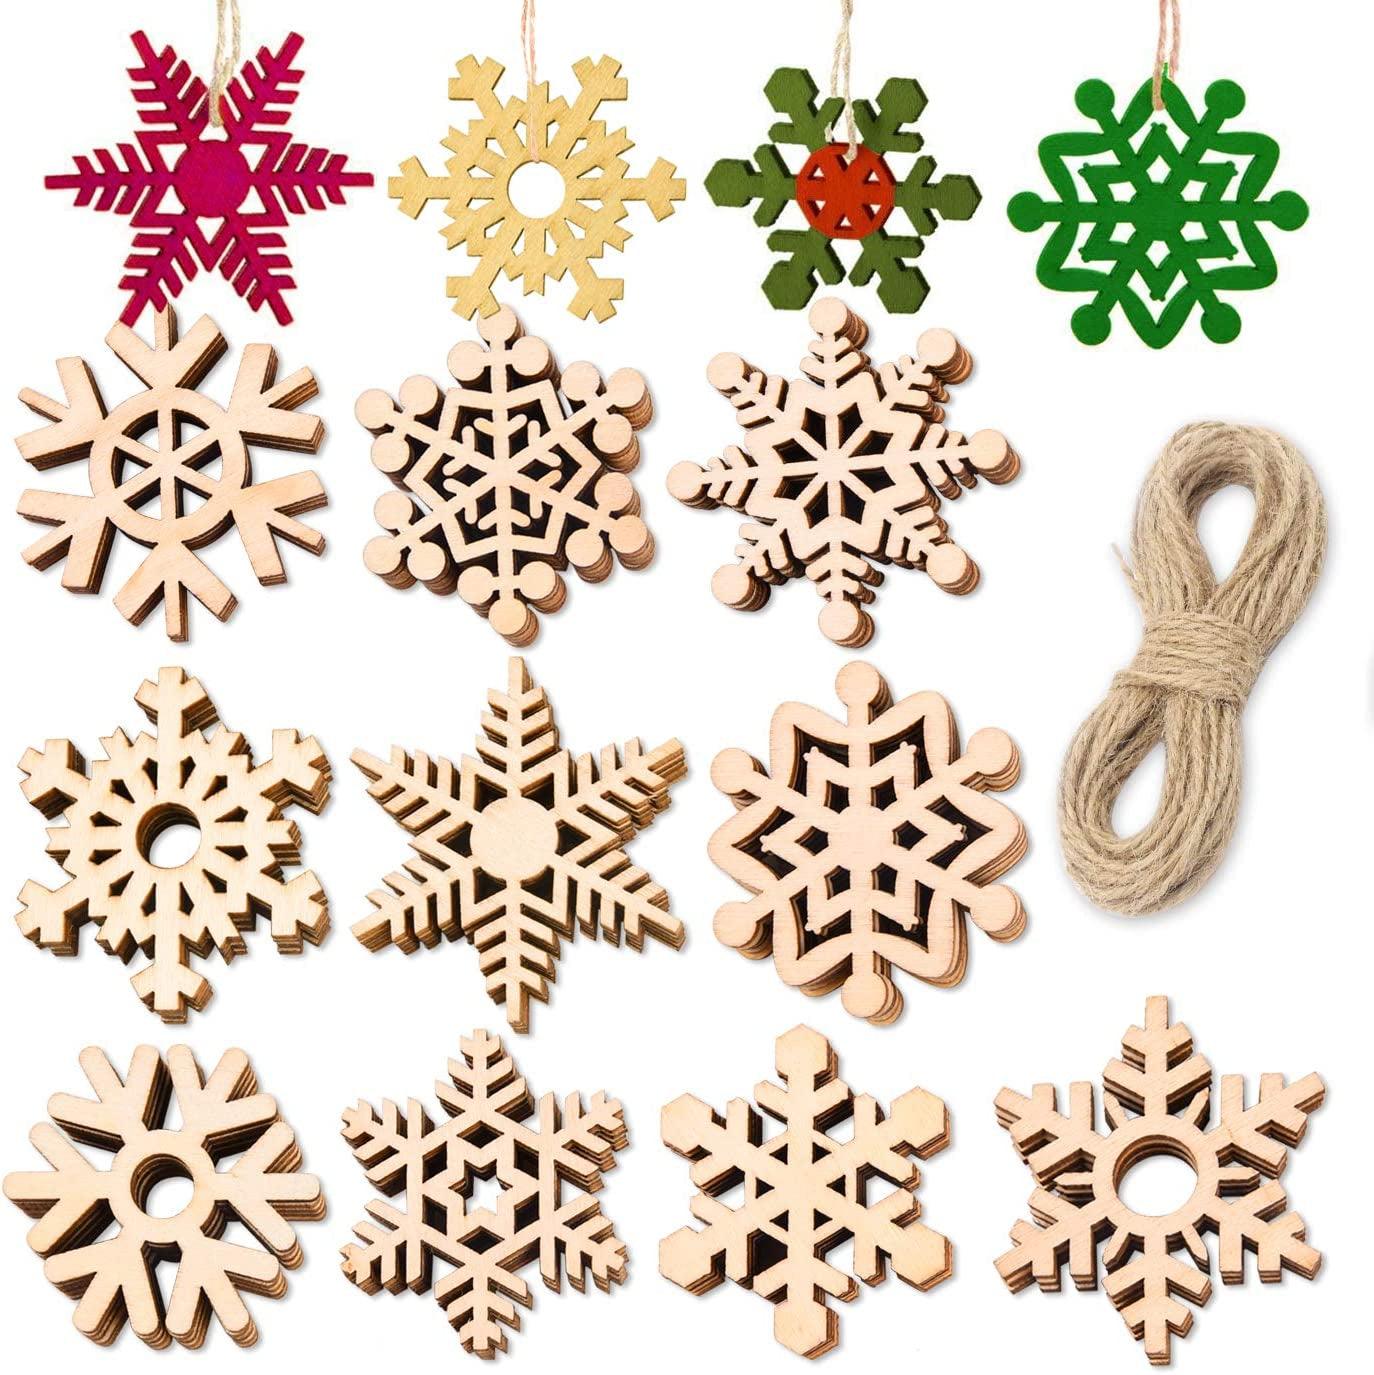 50 Pieces Christmas Wooden Snowflake Ornaments Unfinished DIY Wood Snowflake Cutouts Christmas Tree Hanging Ornaments with Strings - WoodArtSupply